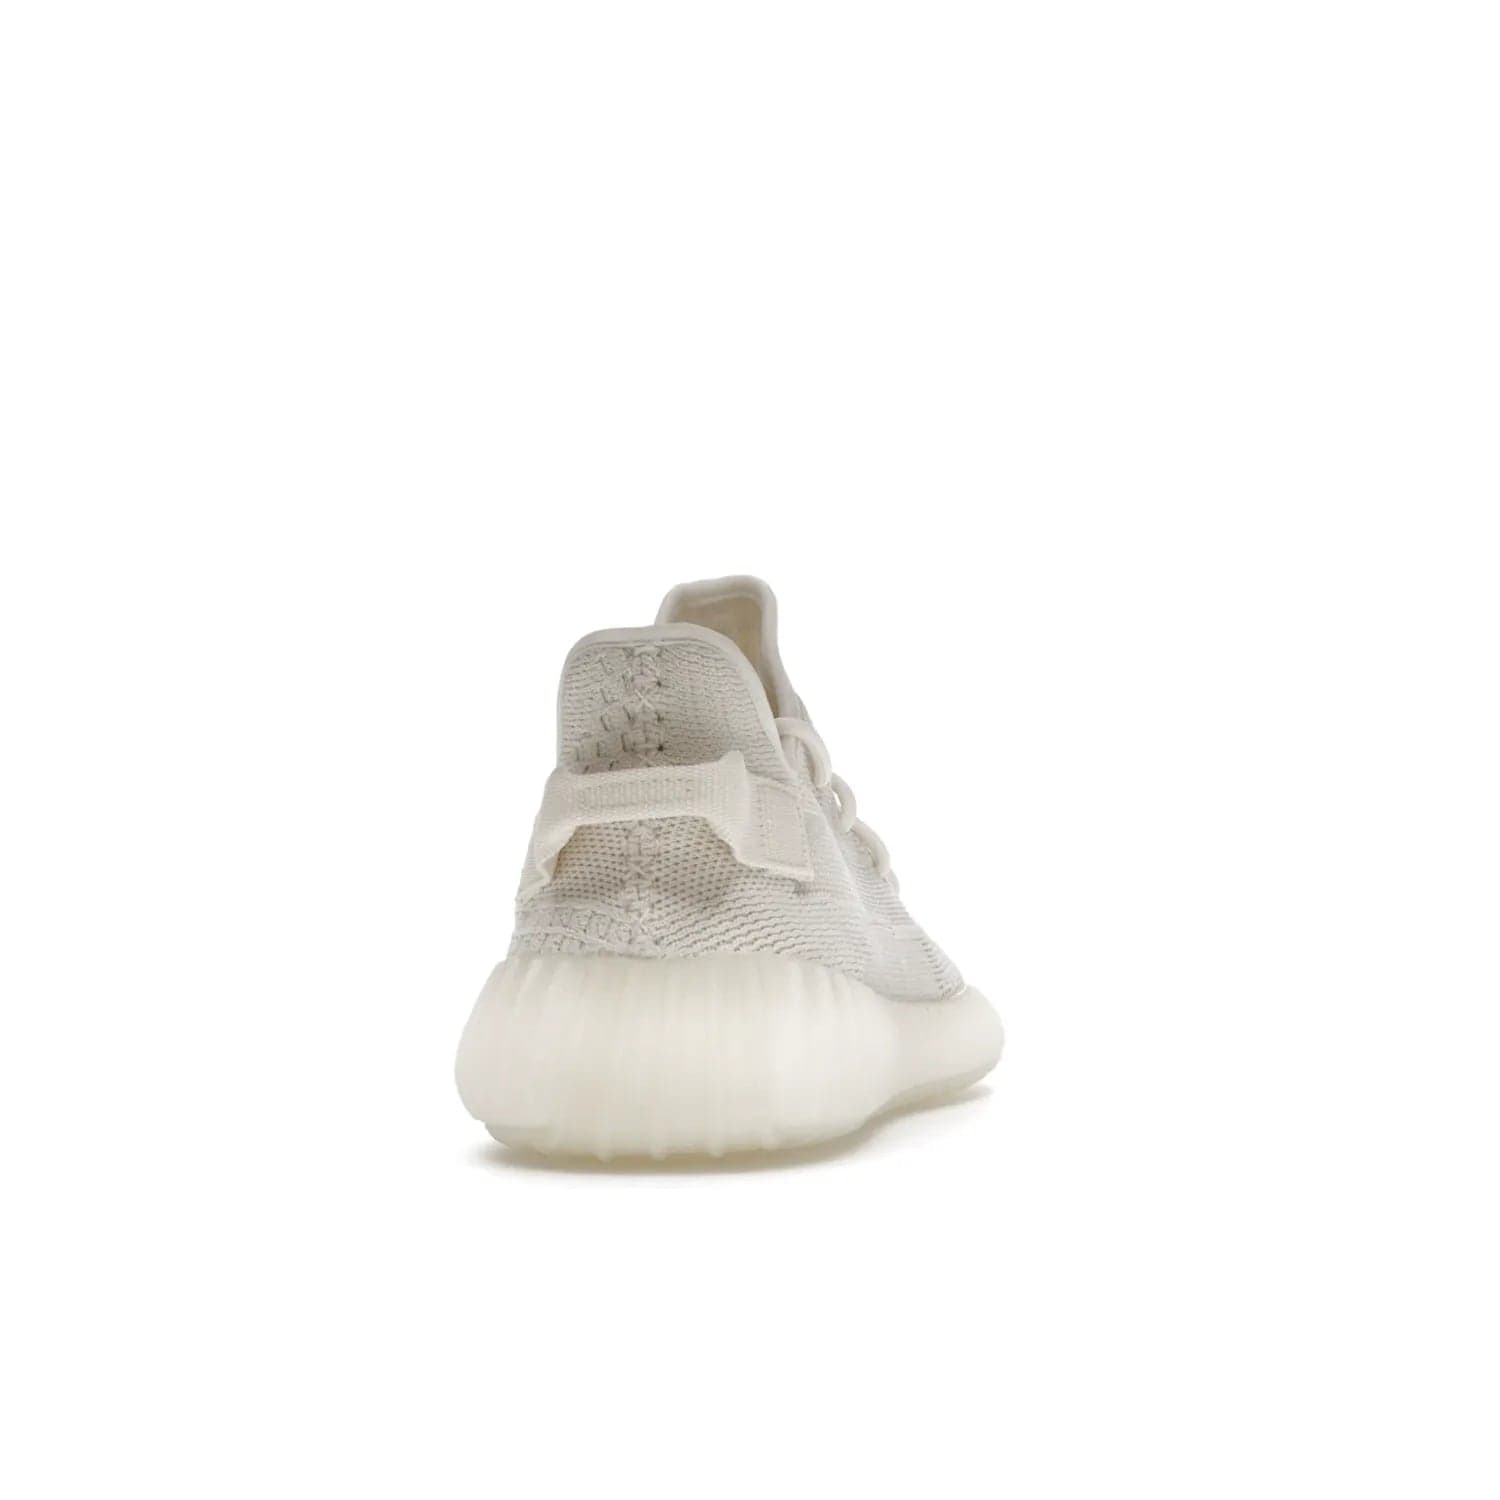 adidas Yeezy Boost 350 V2 Bone - Image 29 - Only at www.BallersClubKickz.com - Grab the stylish and comfortable adidas Yeezy Boost 350 V2 Bone in March 2022. This sneaker features a triple white Primeknit upper, mesh side stripes and canvas heel tabs, sitting atop a semi-translucent sole with Boost technology. Sure to keep your feet comfortable and stylish!